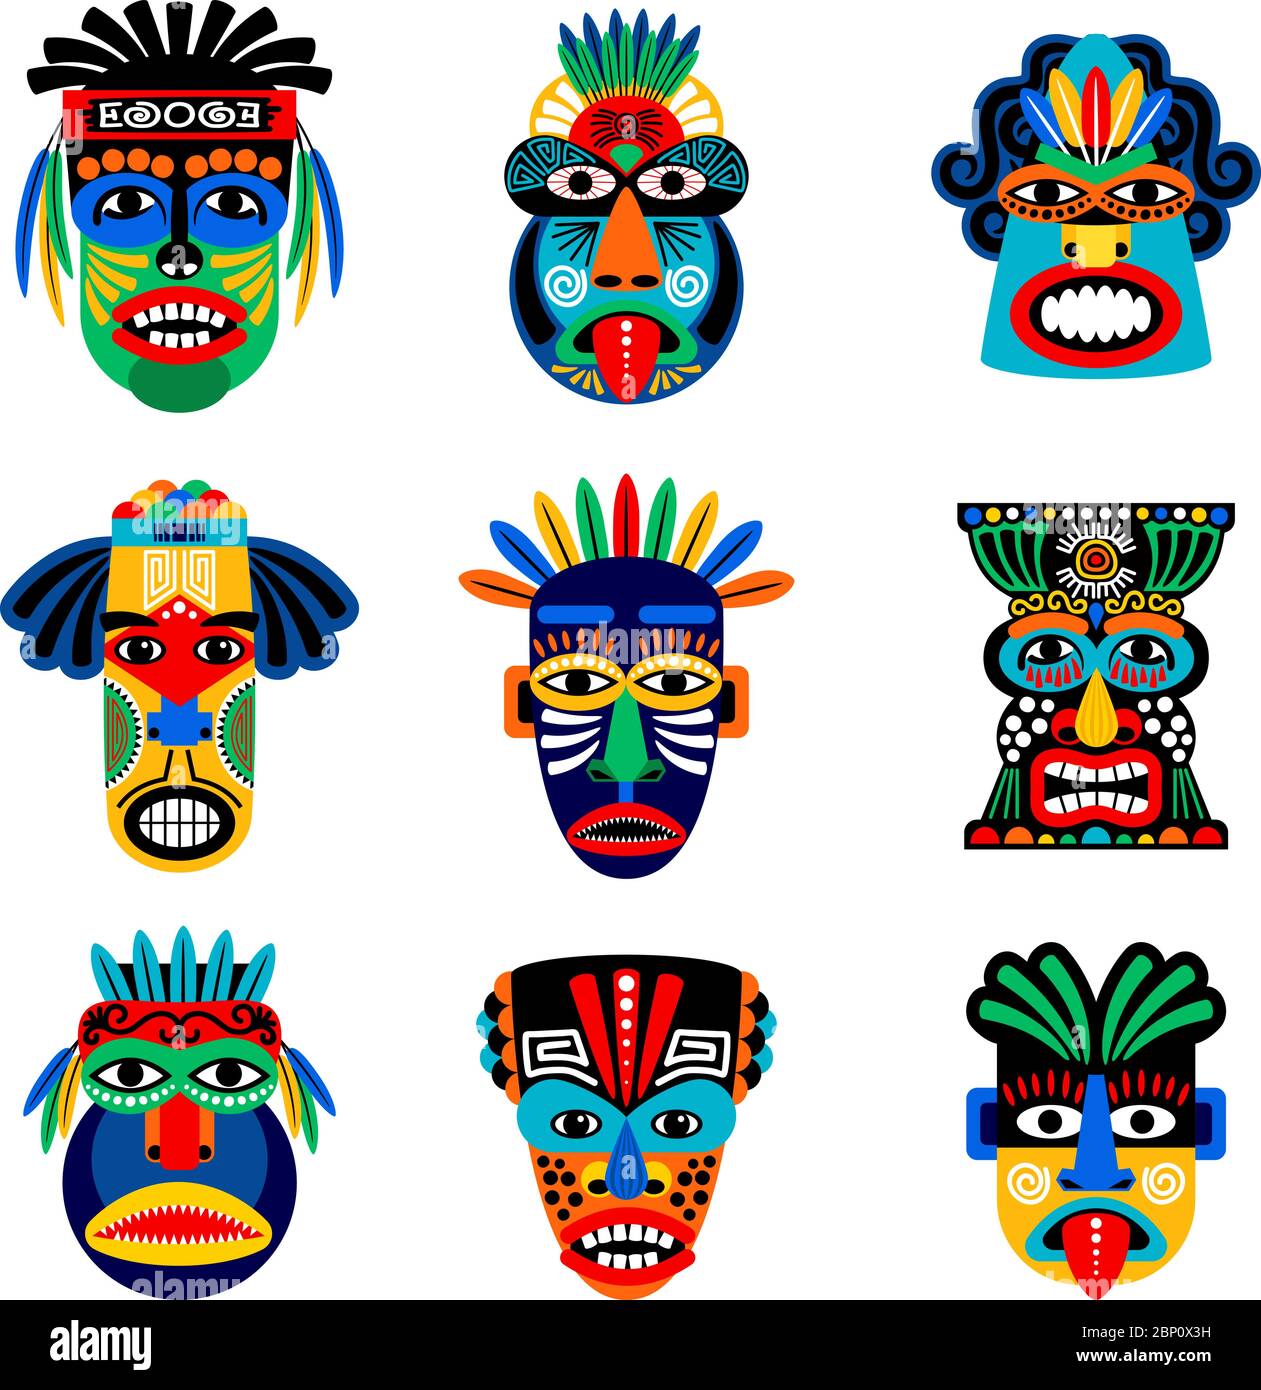 Zulu or aztec mask vector icons. Mexican indian inca warrior masks isolated on white background Stock Vector